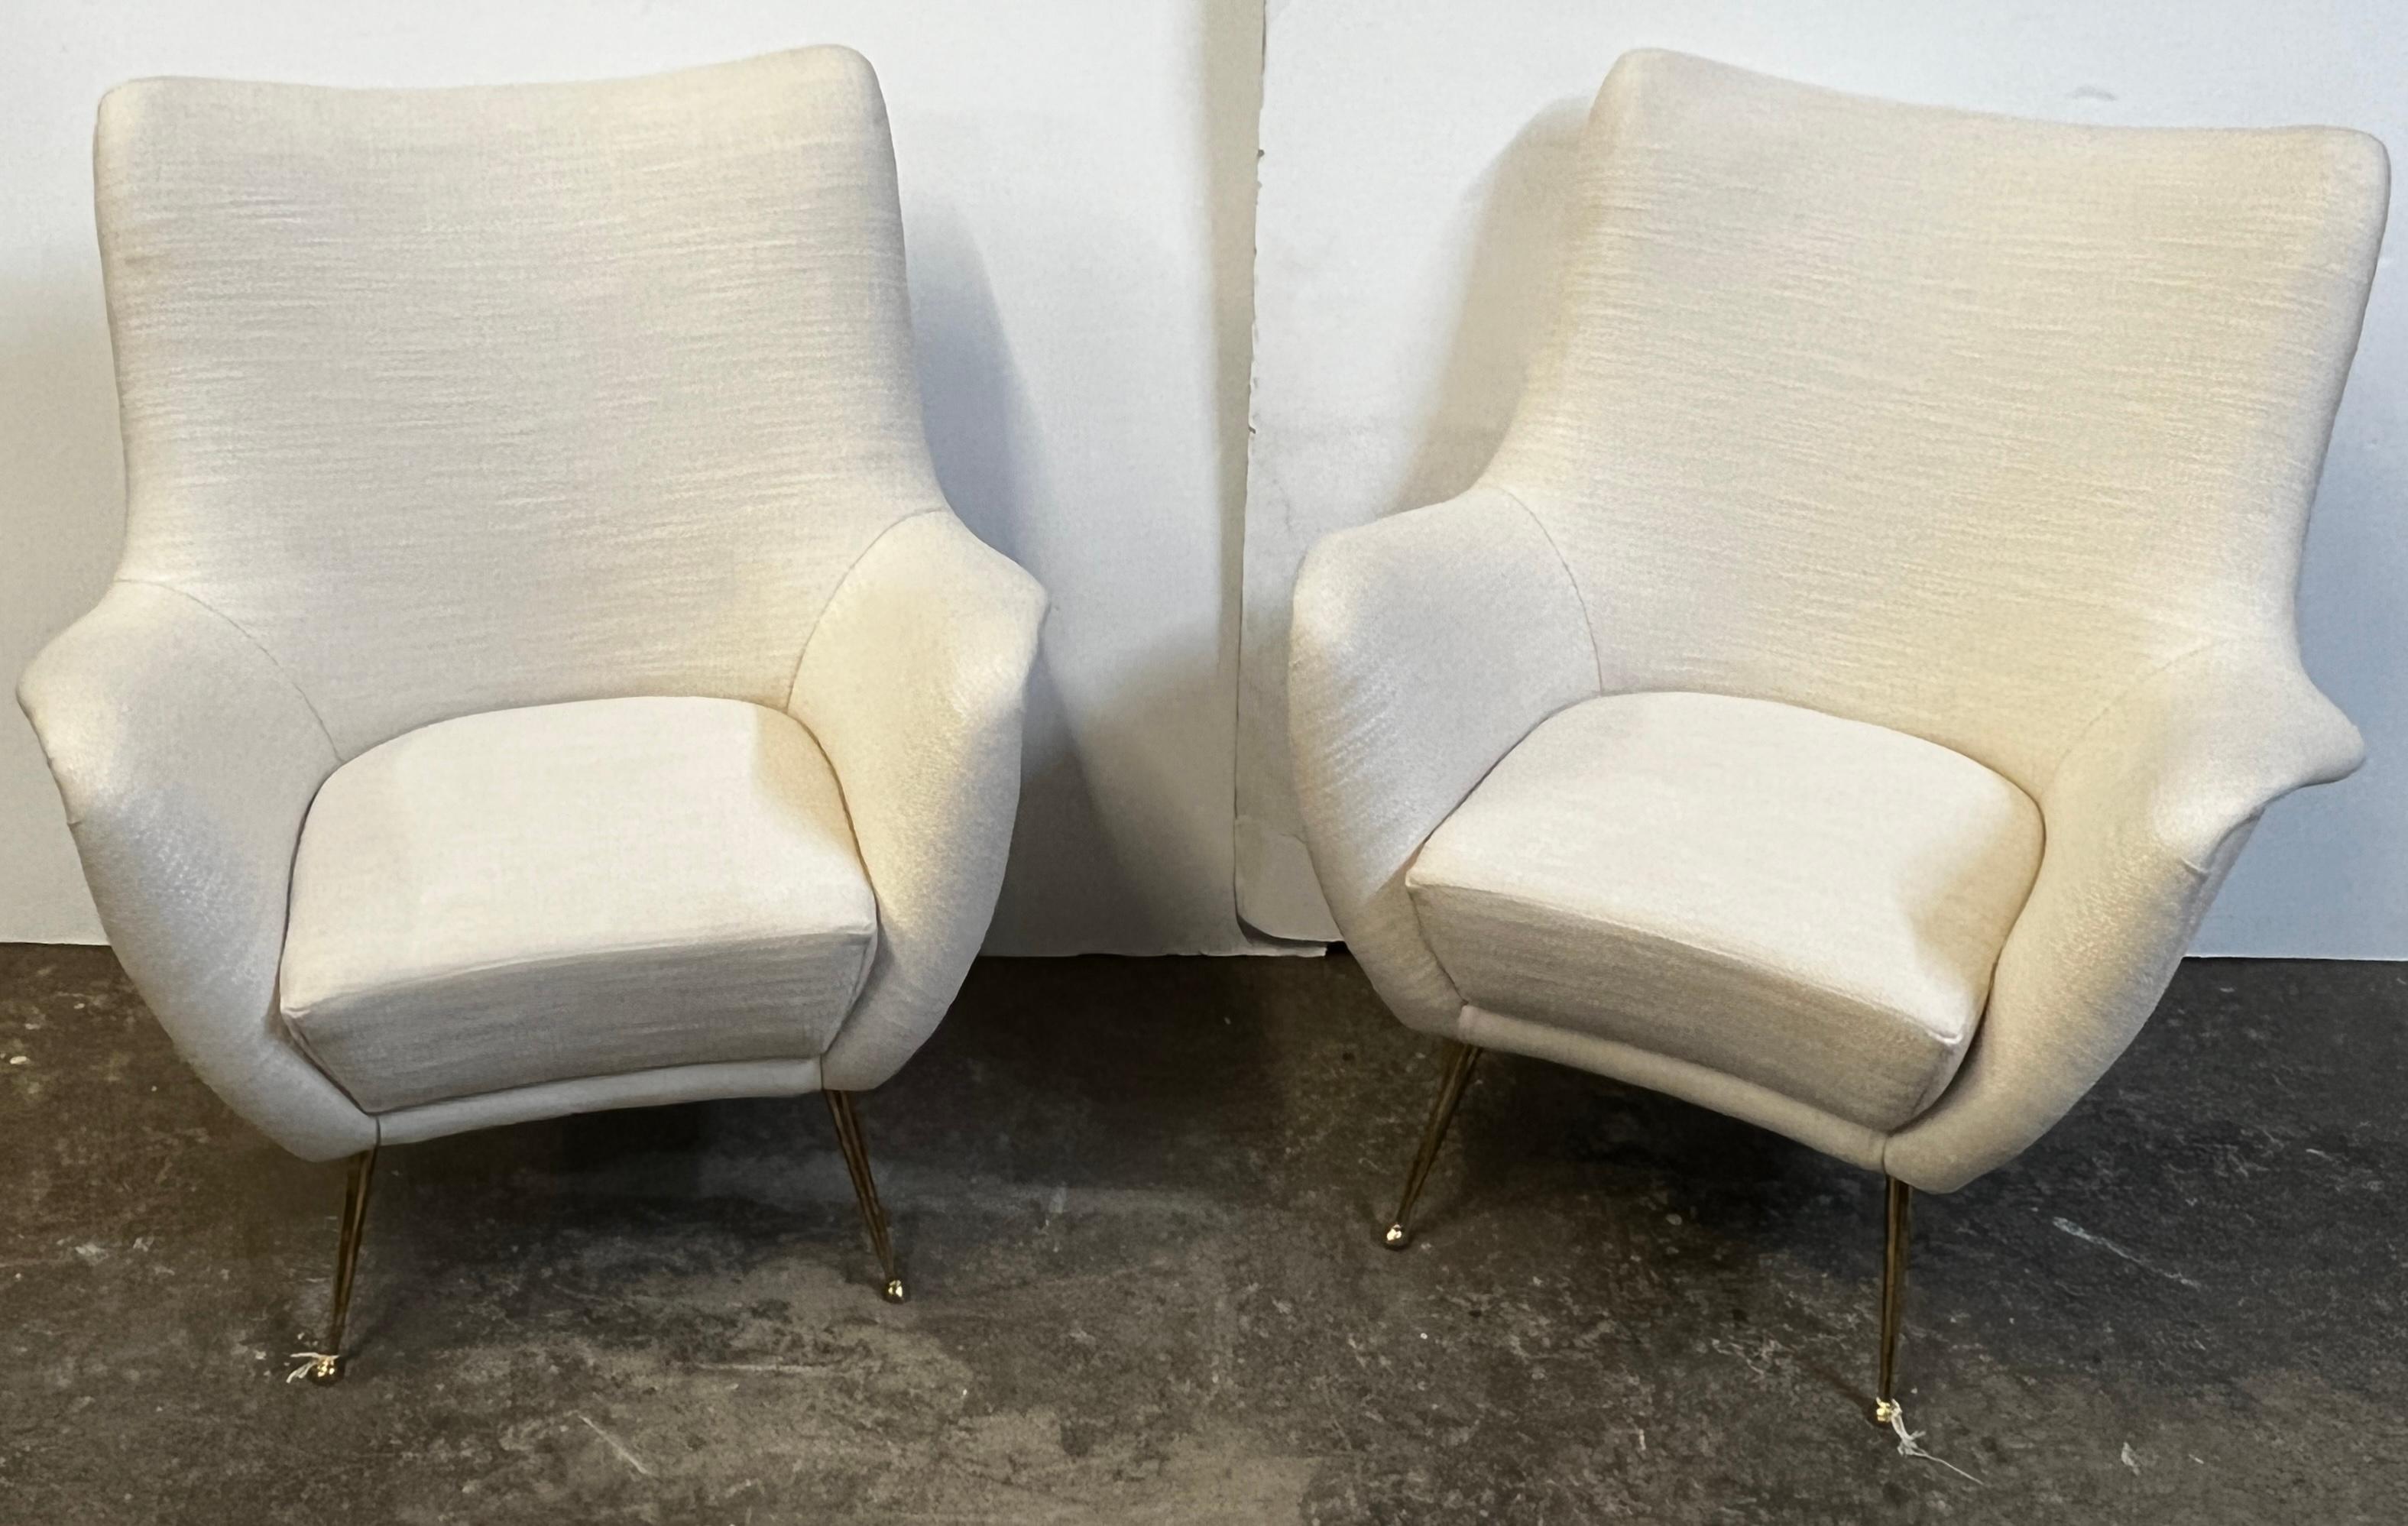 Beautiful pair of newly constructed Italian chairs attributed to a Mid Century Modern style. This lovely pair of chairs are featuring new stunning upholstery with 4 slender legs. The neutral color palette allows for an easy transition for this pair